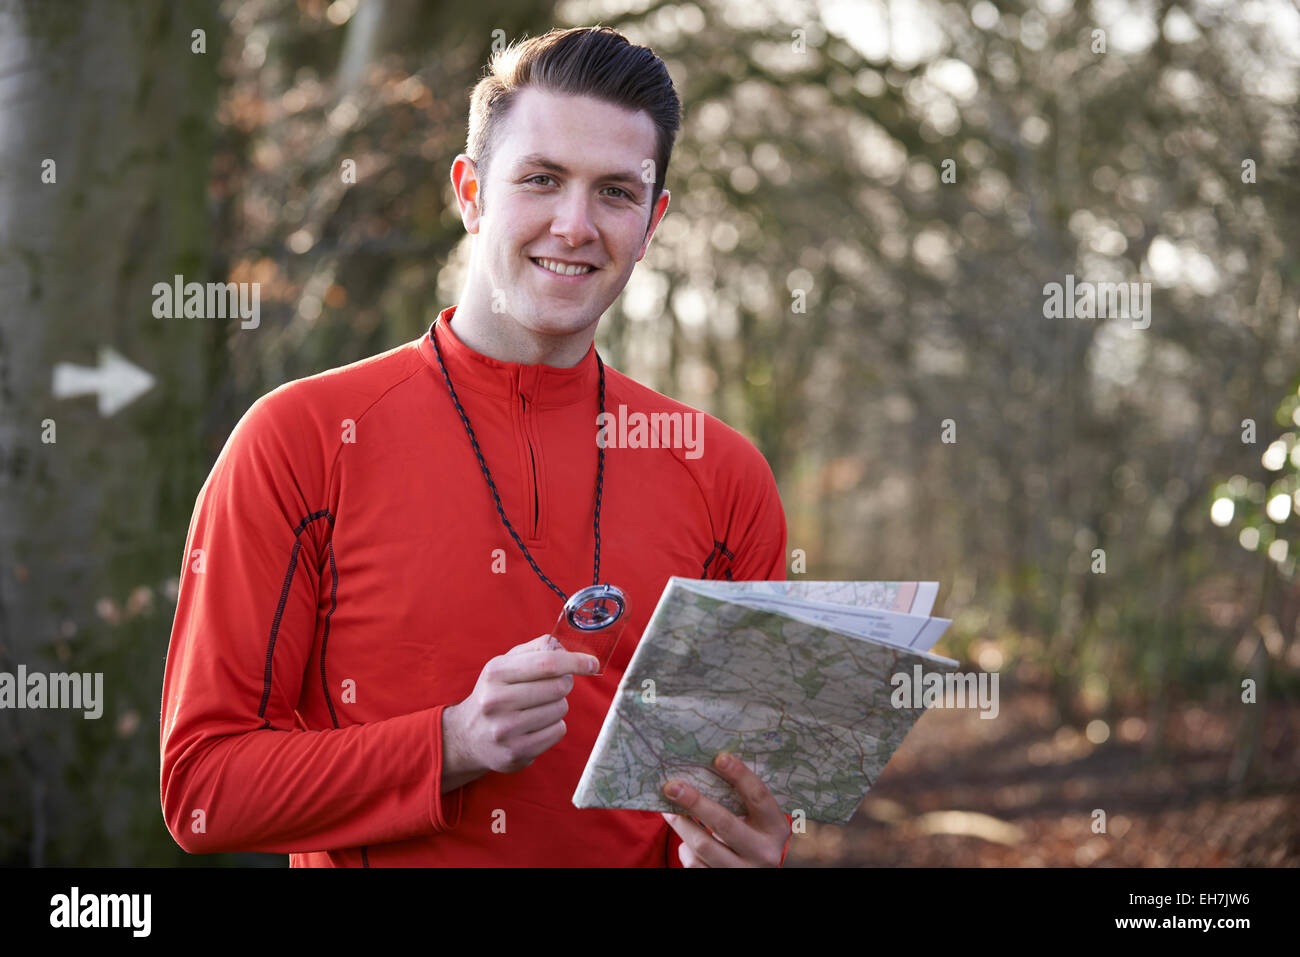 Man Orienteering In Woodlands With Map And Compass Stock Photo